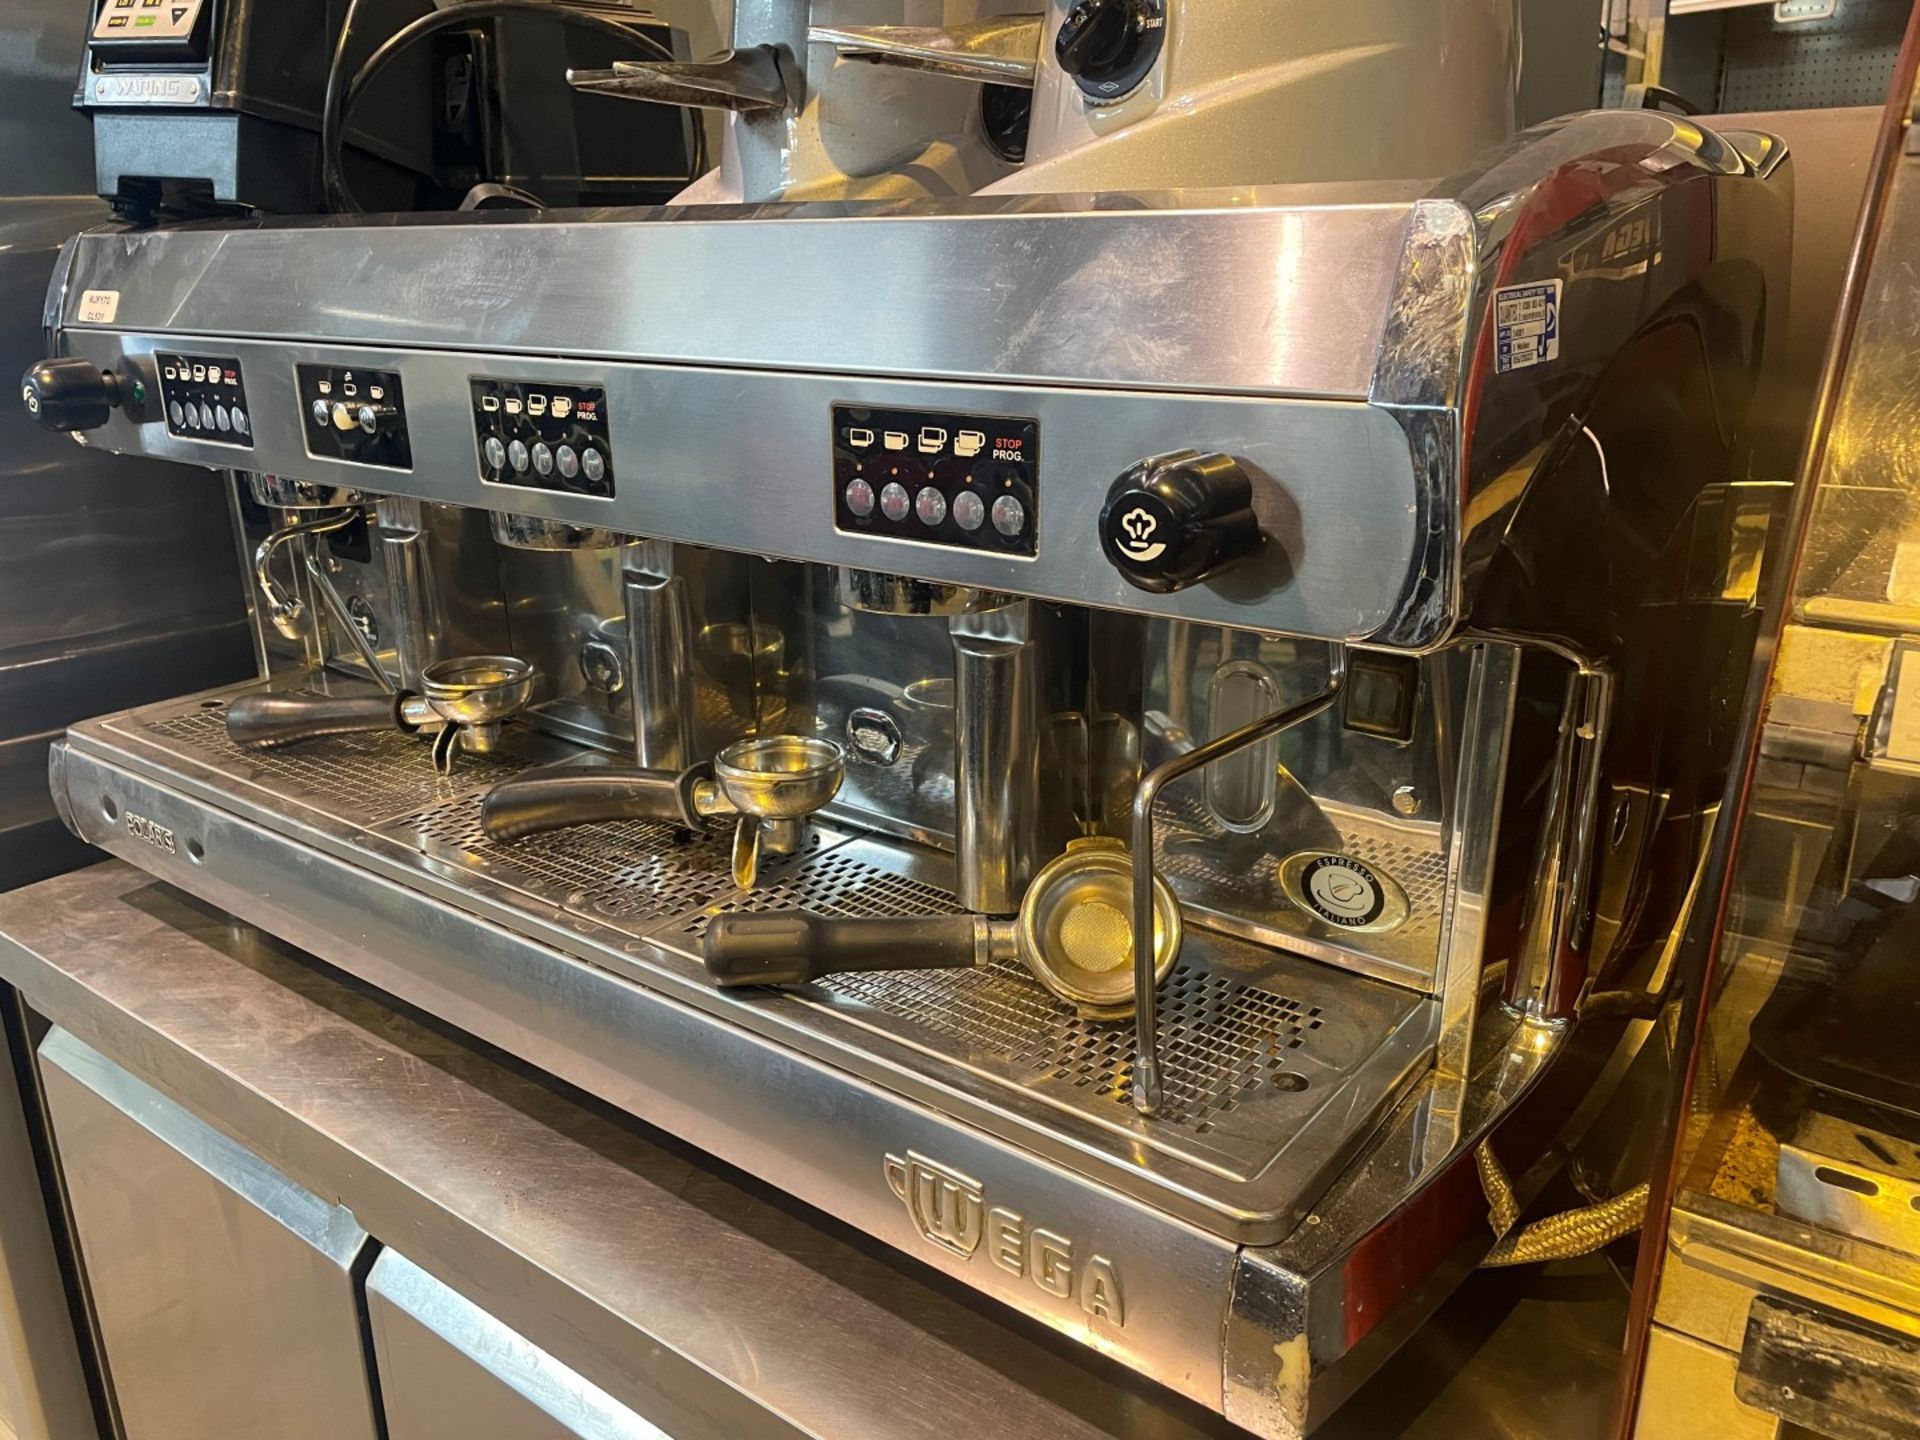 1 x Polaris Wega 3 Group Commercial Espresso Coffee Machine - Stainless Steel Finish - Approx 100cms - Image 2 of 7